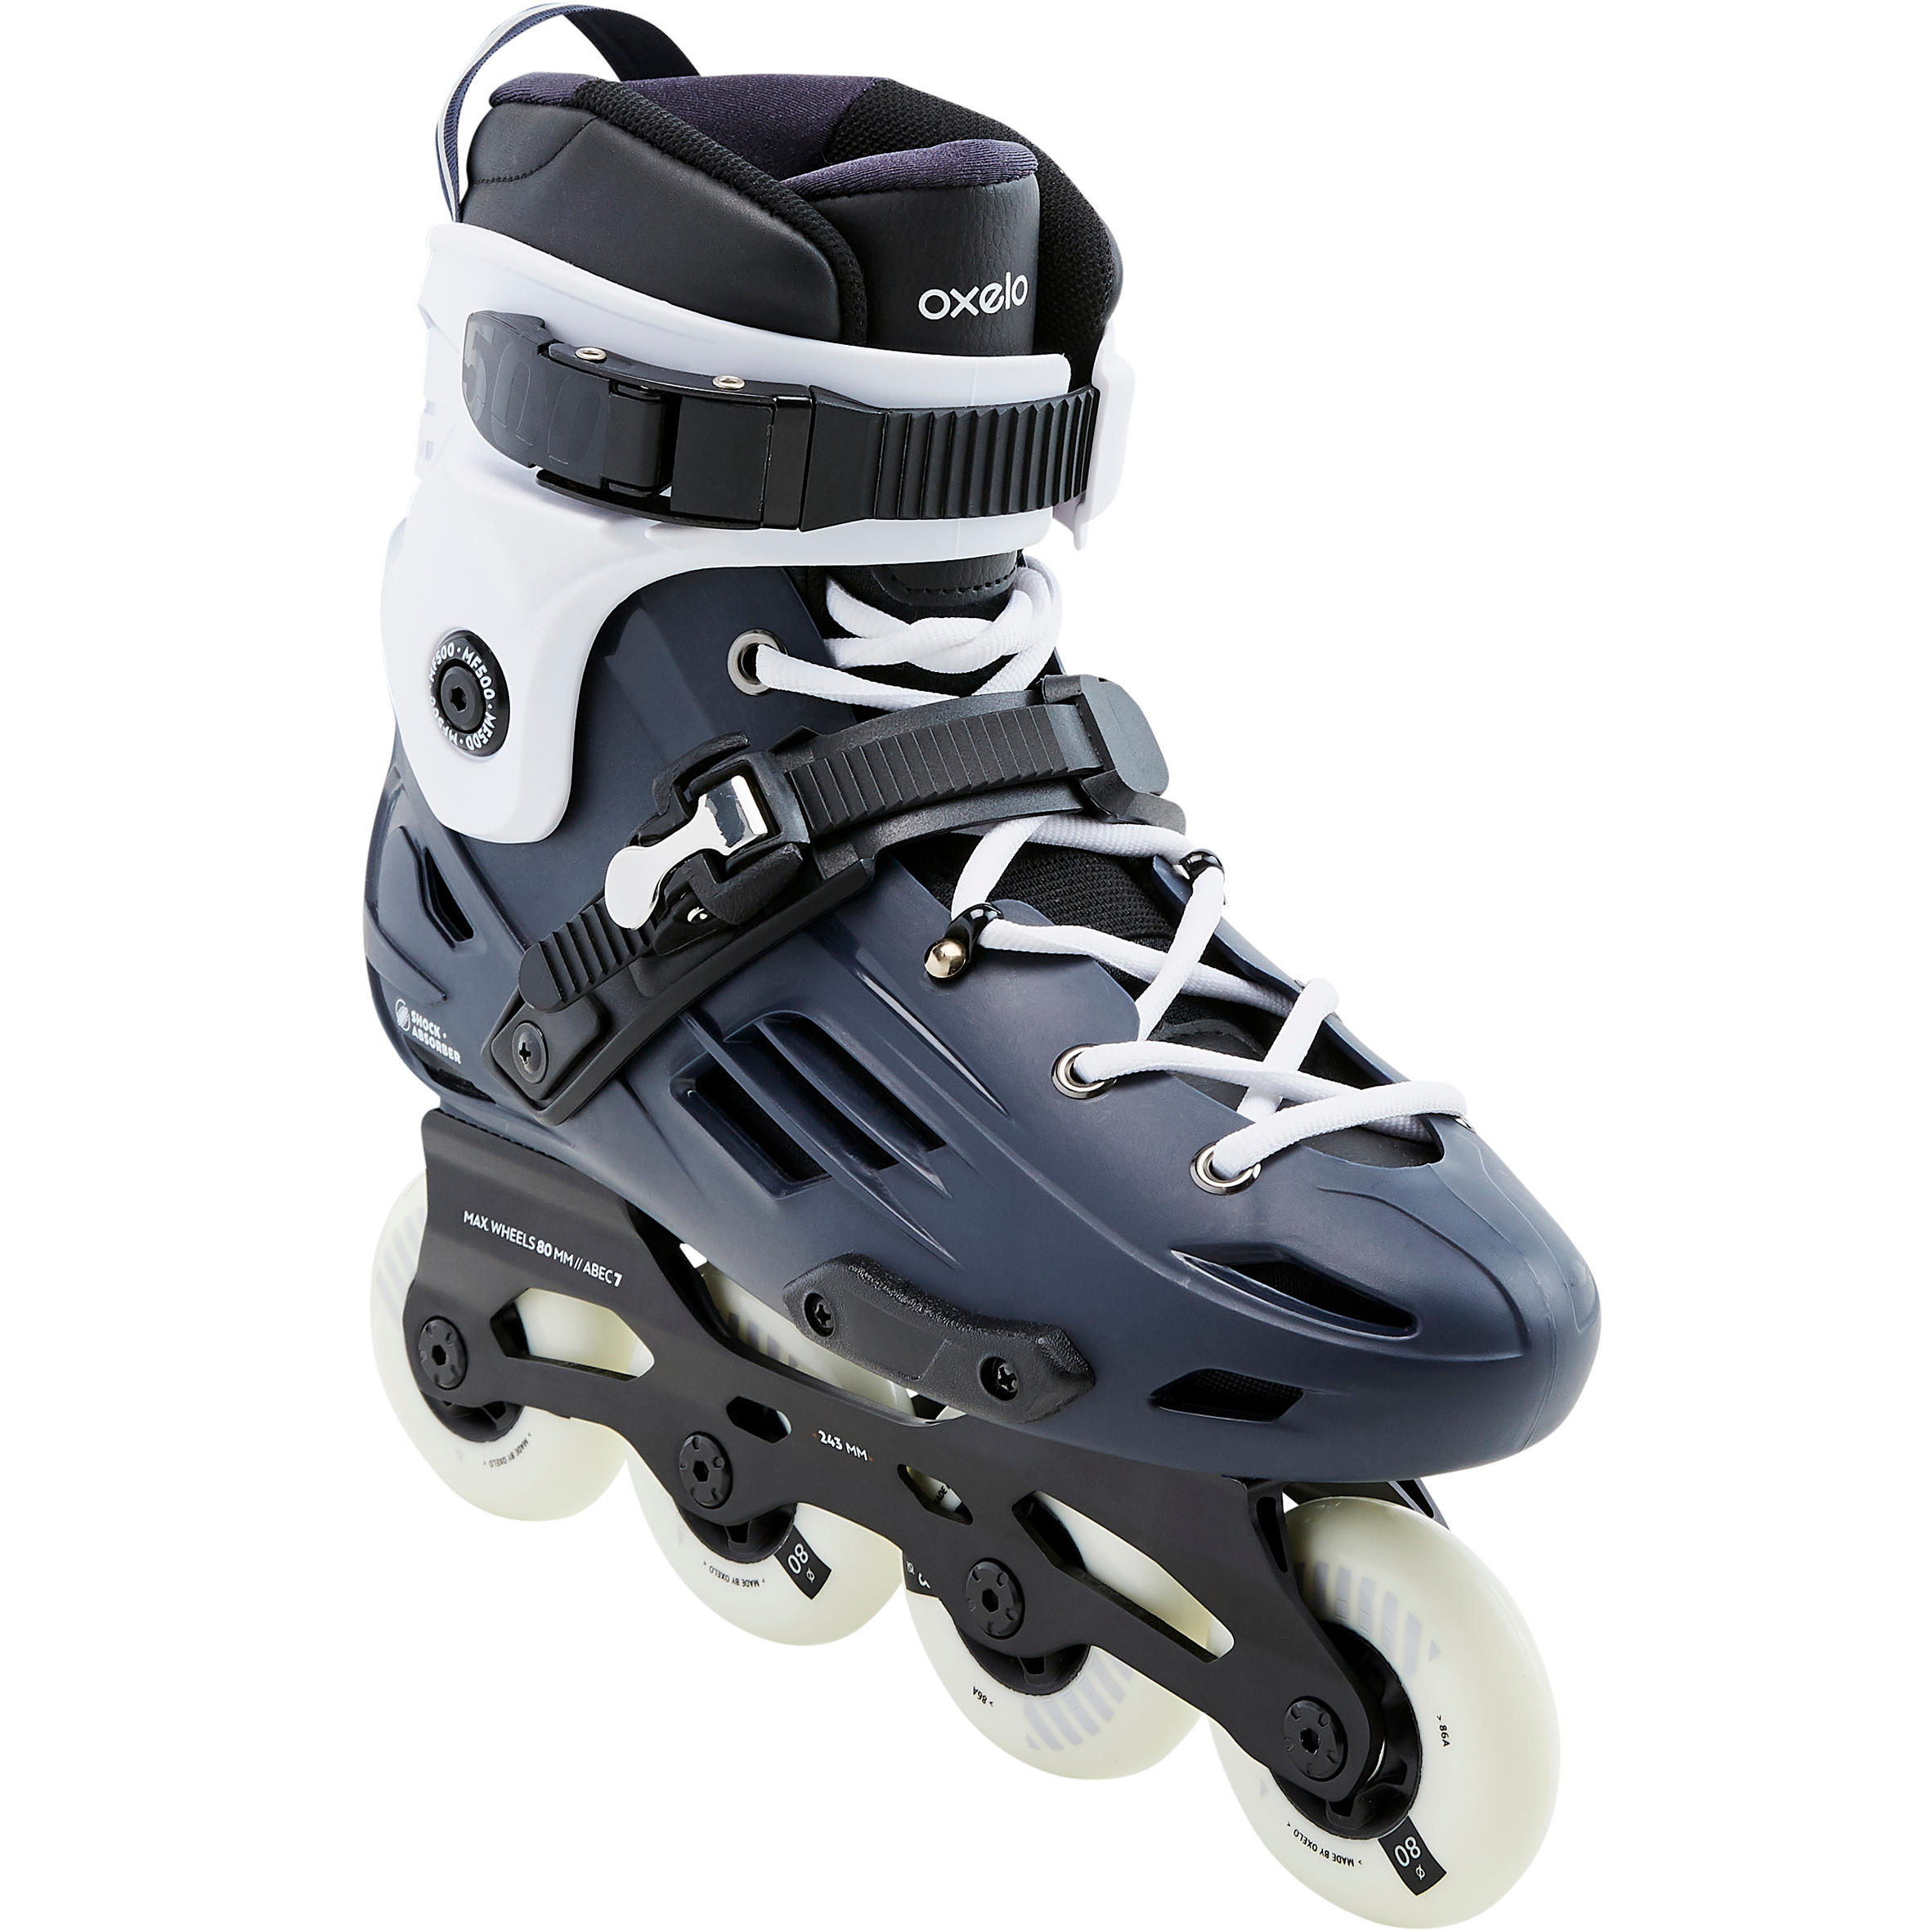 Adult Freeride Hardboot Inline Skates Mf500 Blue White By Oxelo Decathlon Buy At The Price Of 96 47 In Decathlon In Imall Com